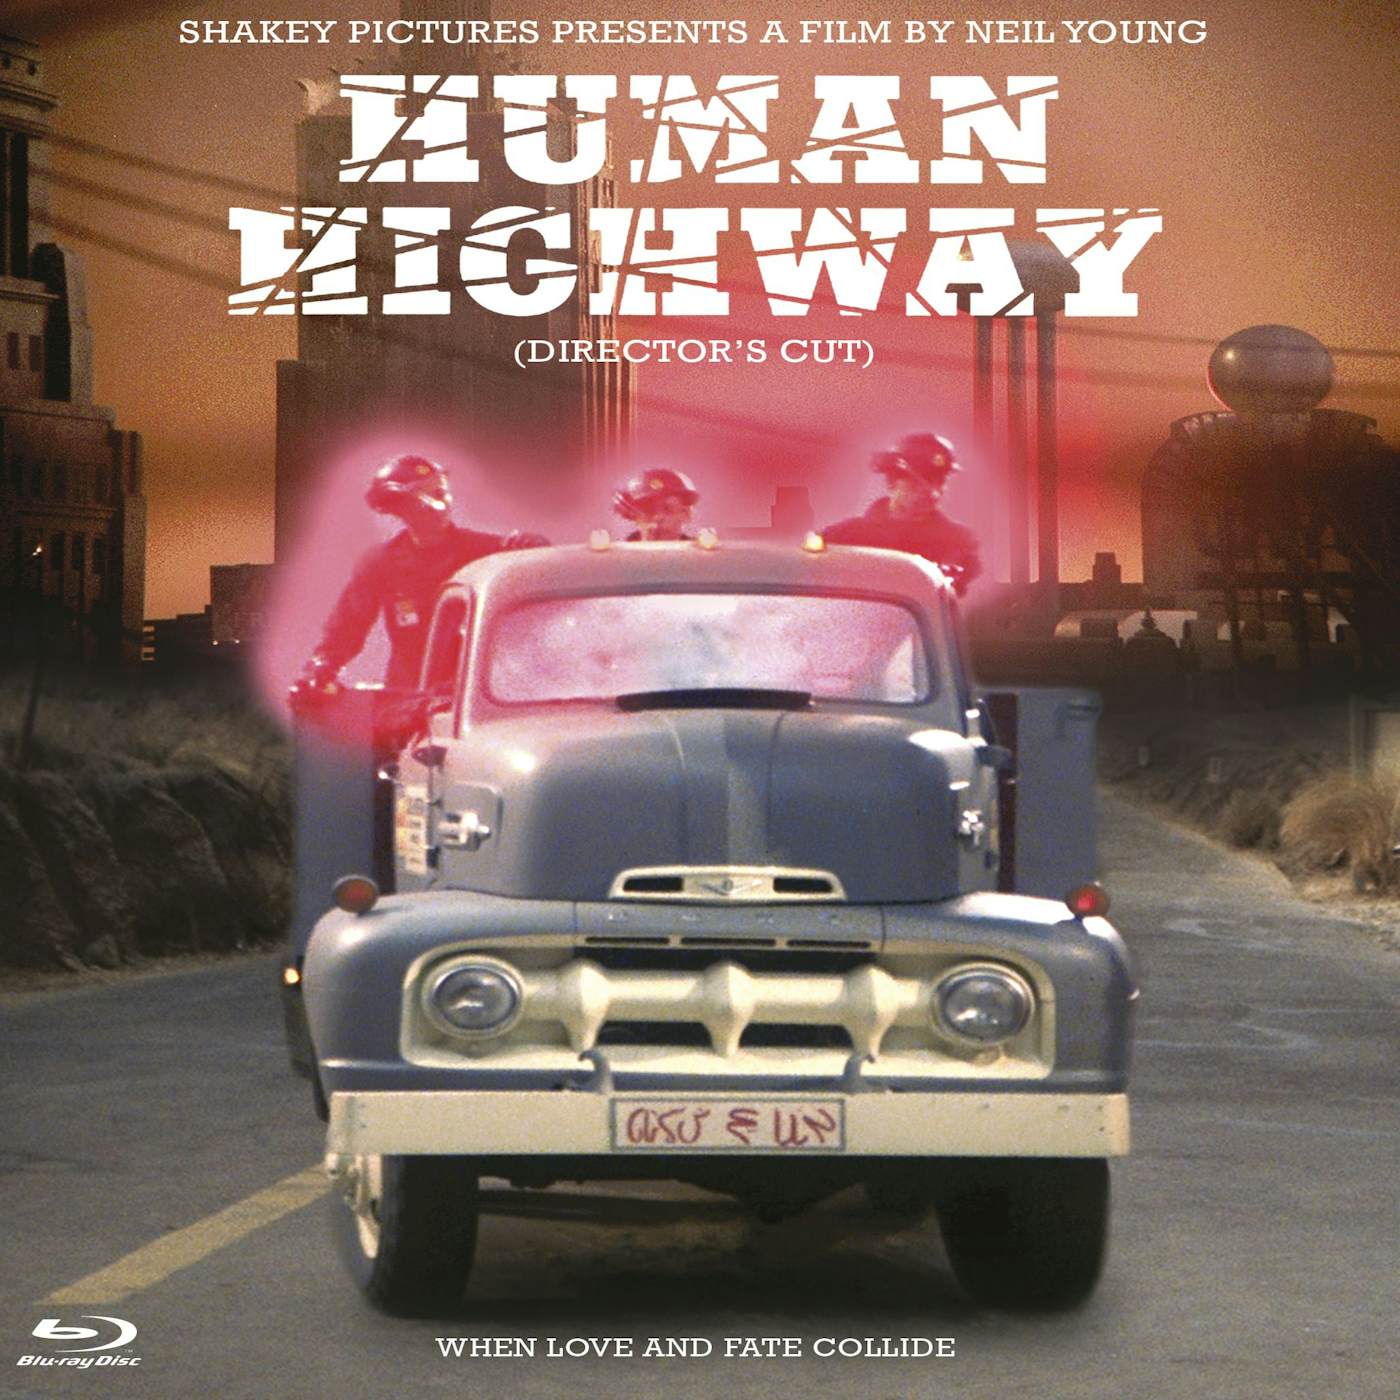 Neil Young & Crazy Horse HUMAN HIGHWAY (DIRECTOR'S CUT) Blu-ray